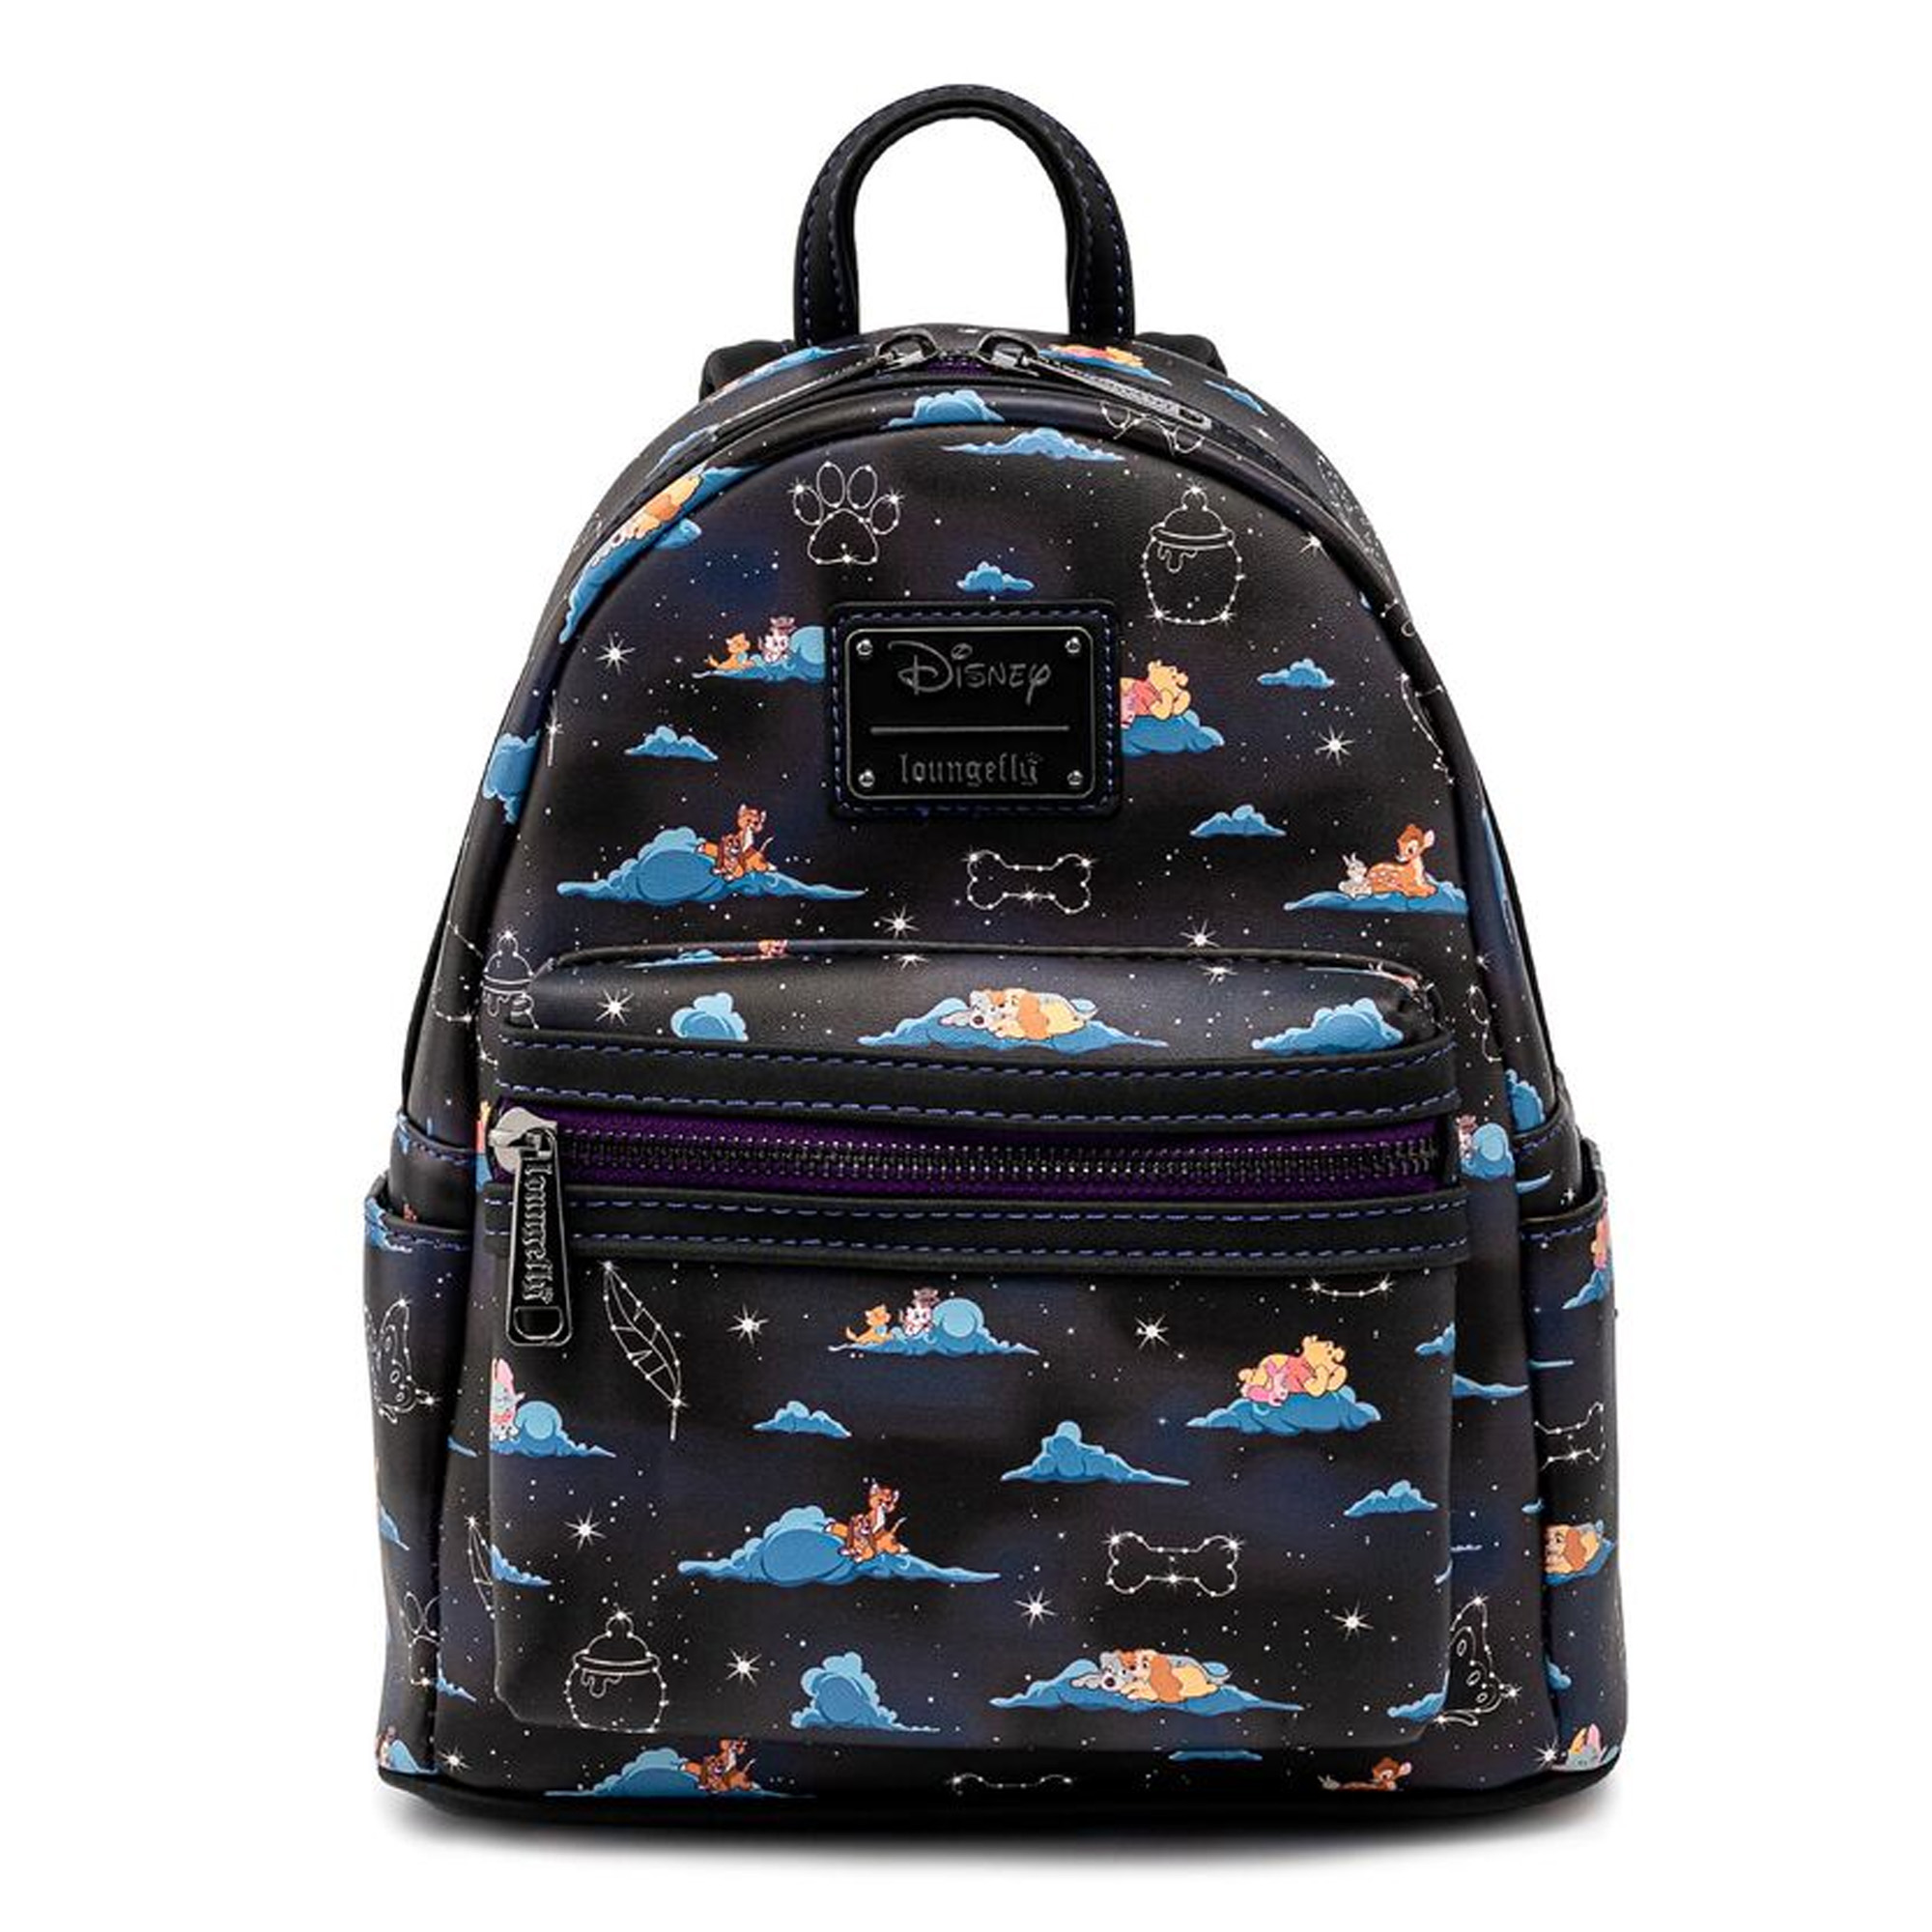 Loungefly Disney Classic Clouds Rucksack